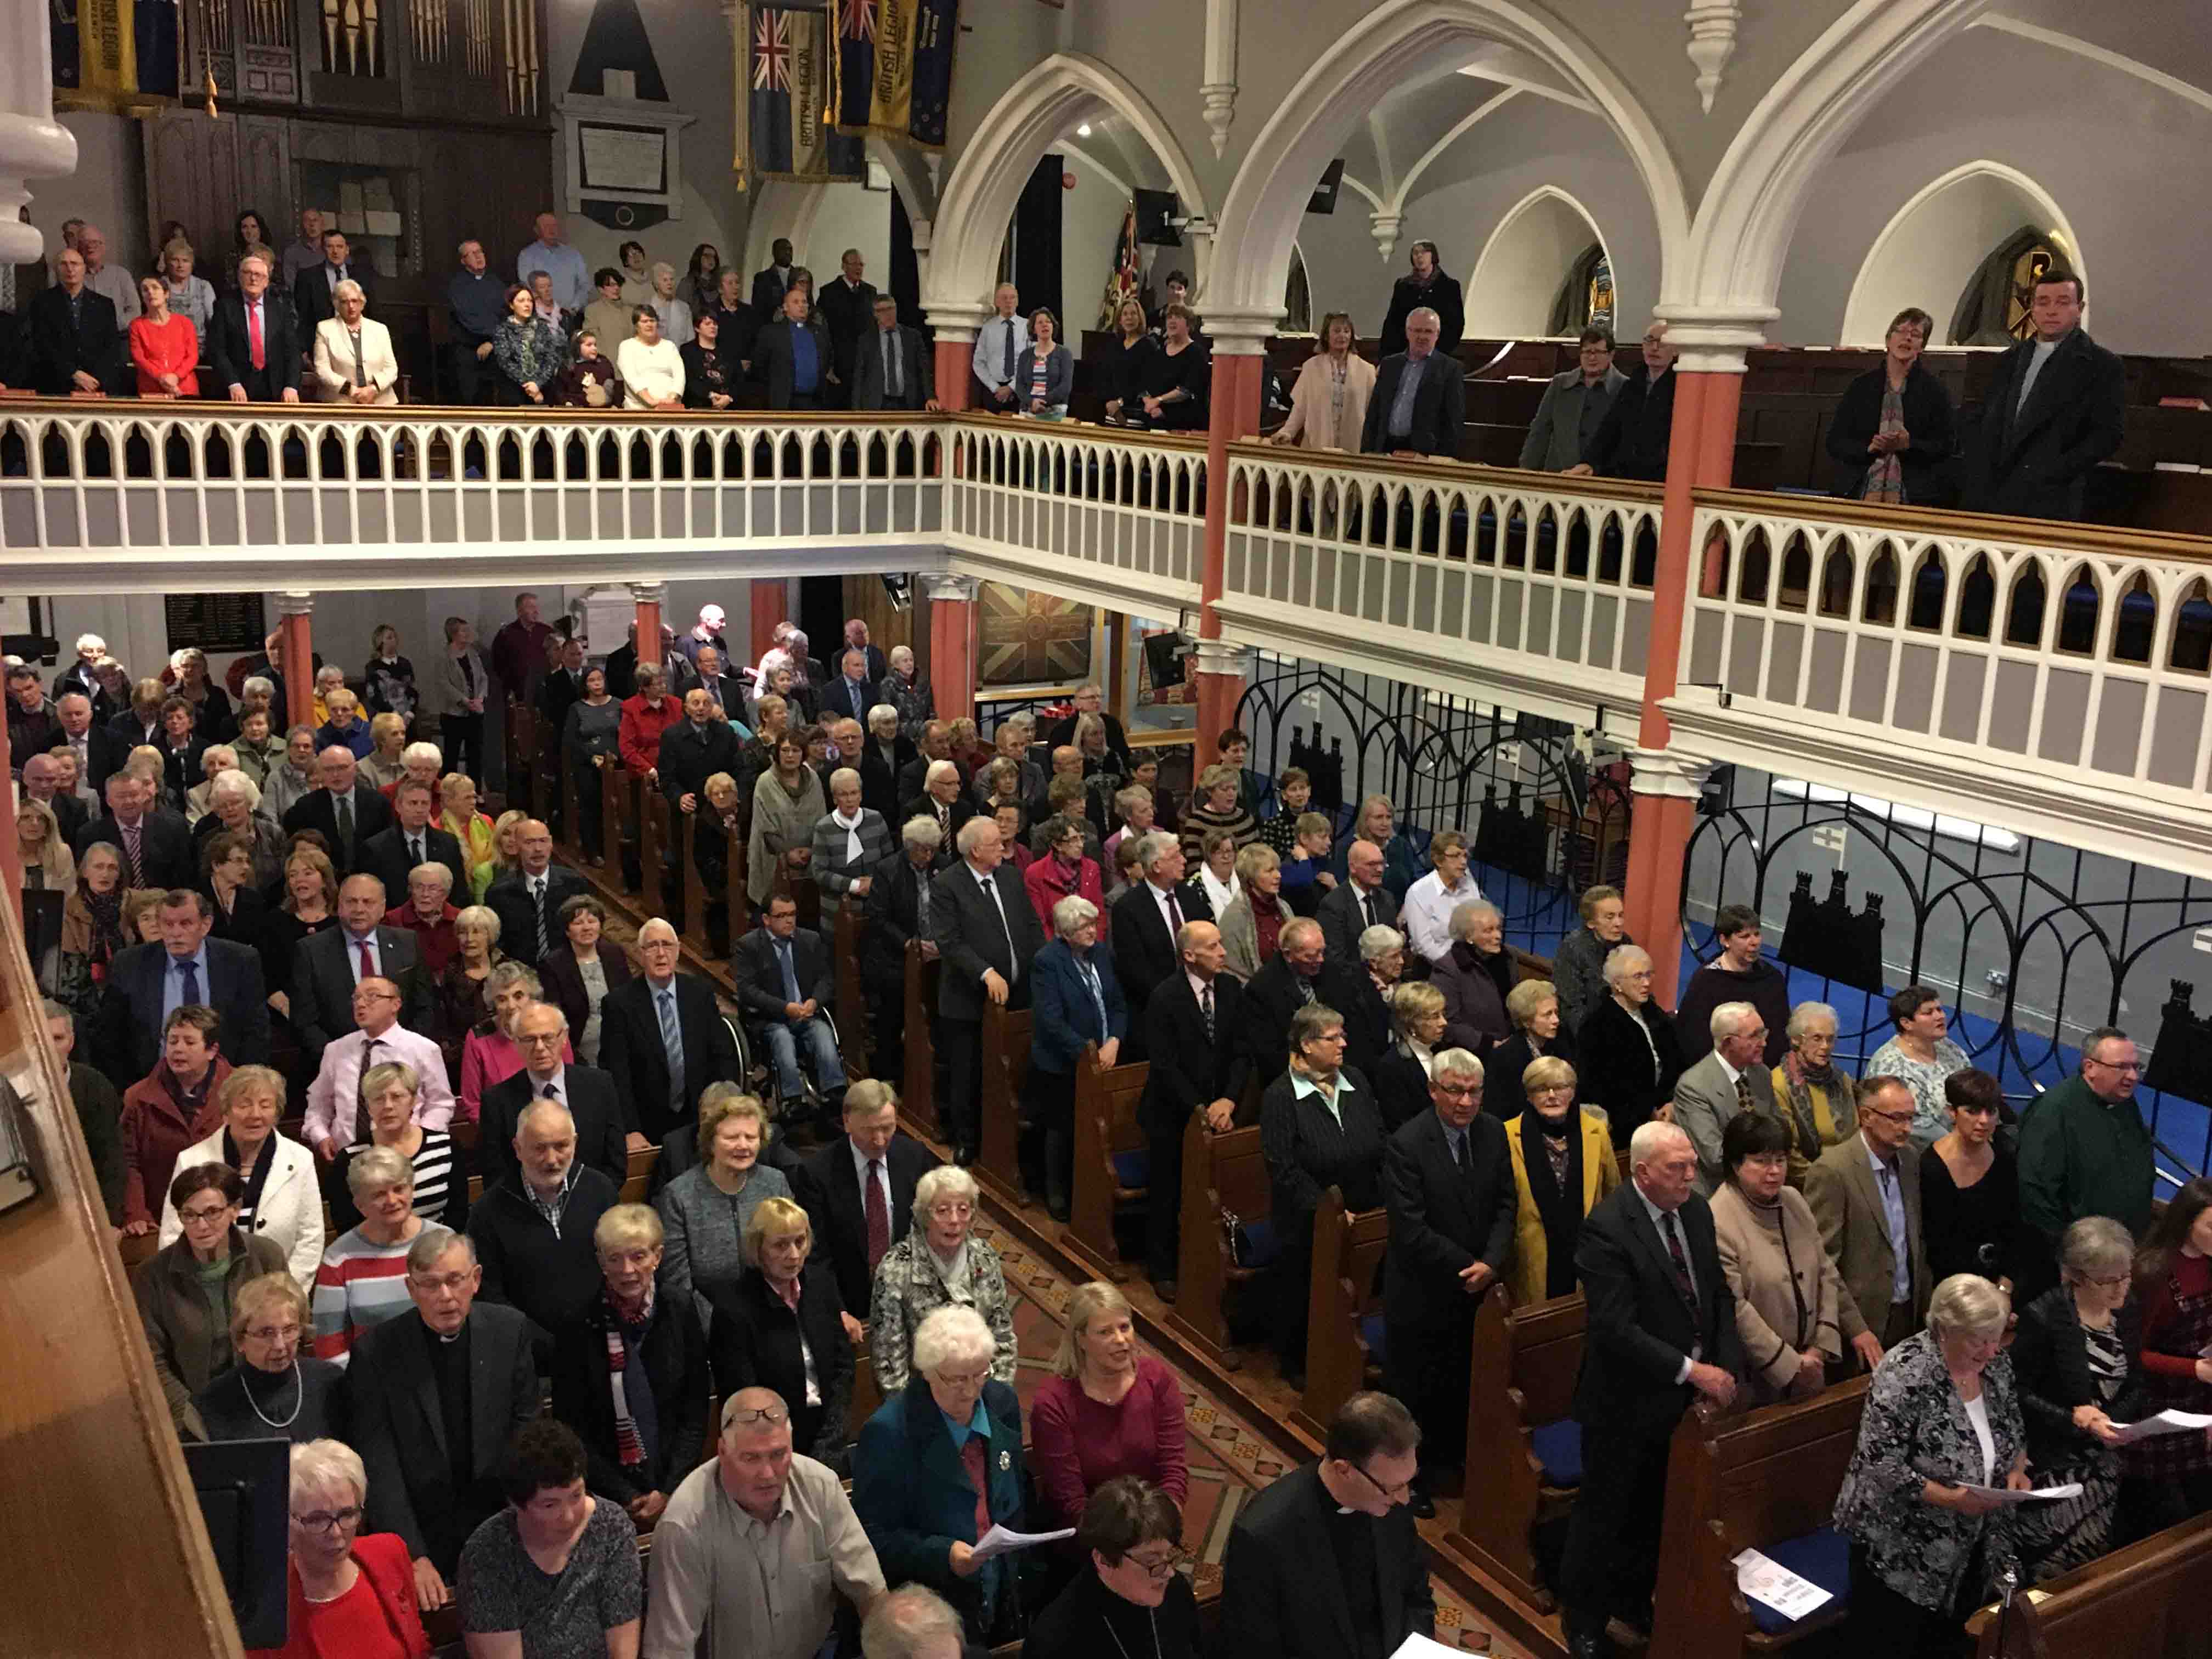 Some of the hundreds of people who attended and took part in the Clogher Diocesan Big Sing in St Macartin's Cathedral, Enniskillen.